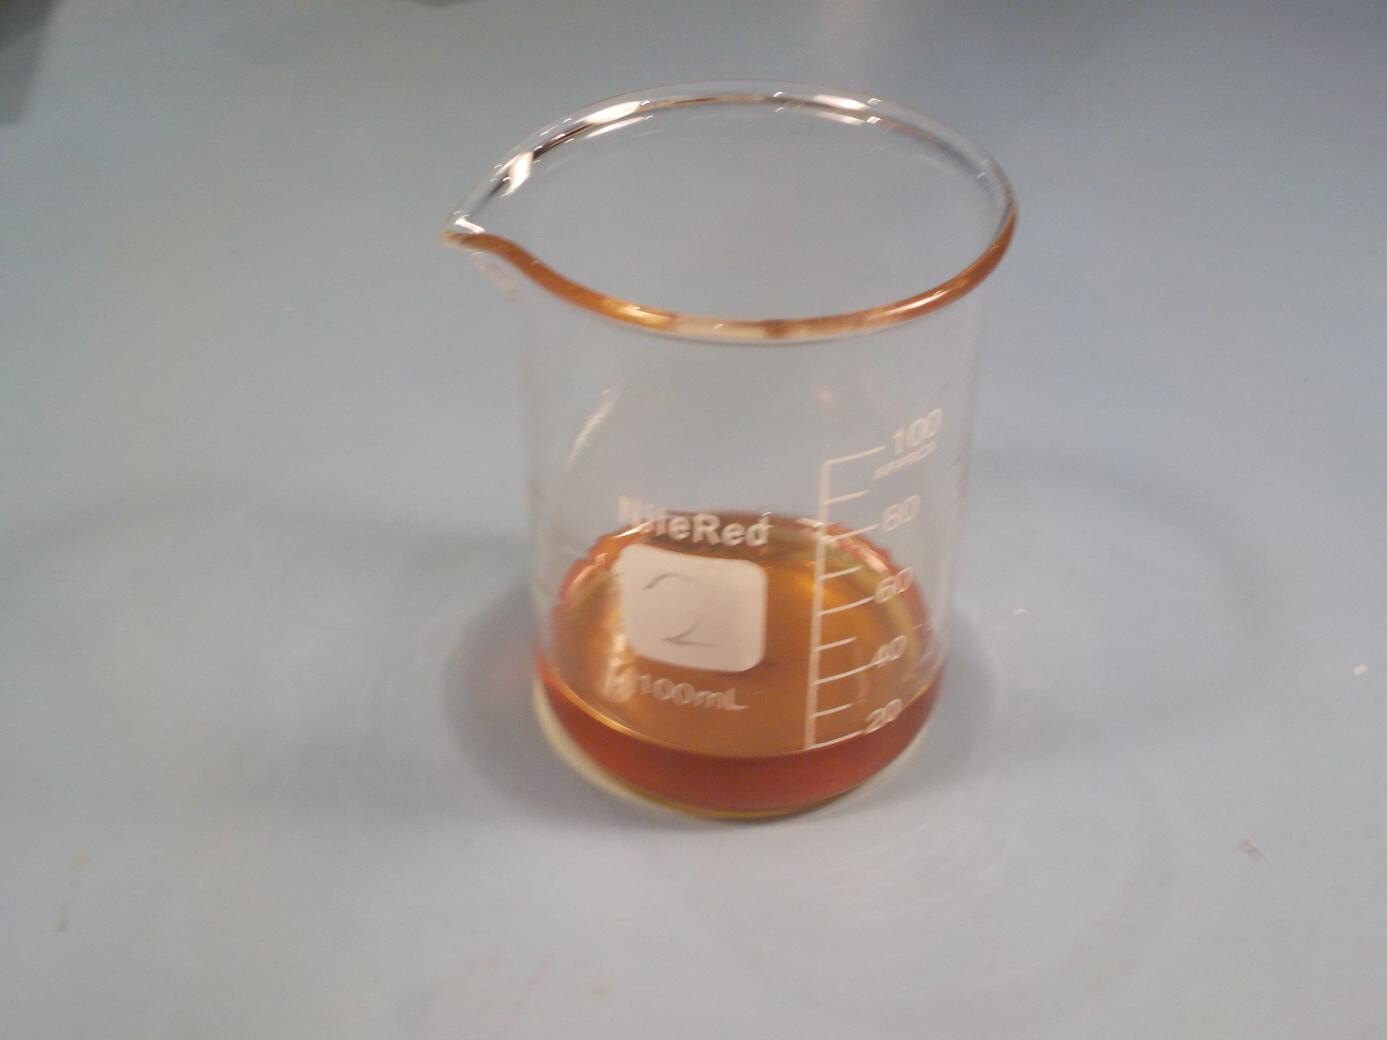 resin solution evaporated down to a syrup-like consistency